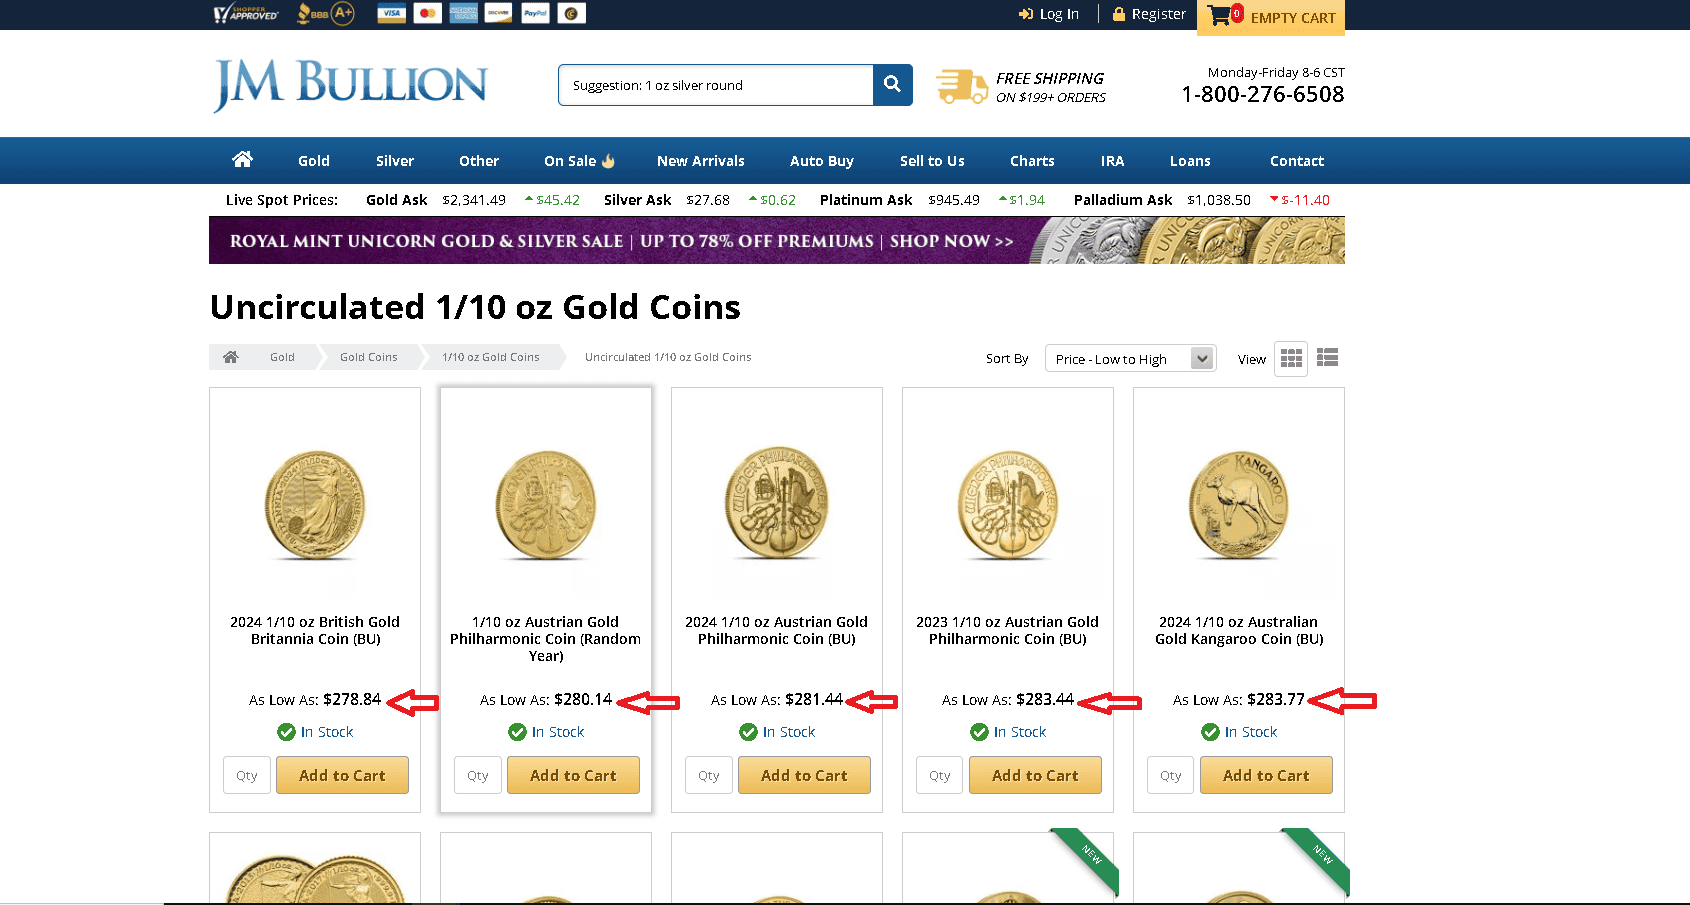 JM Bullion live prices for their products